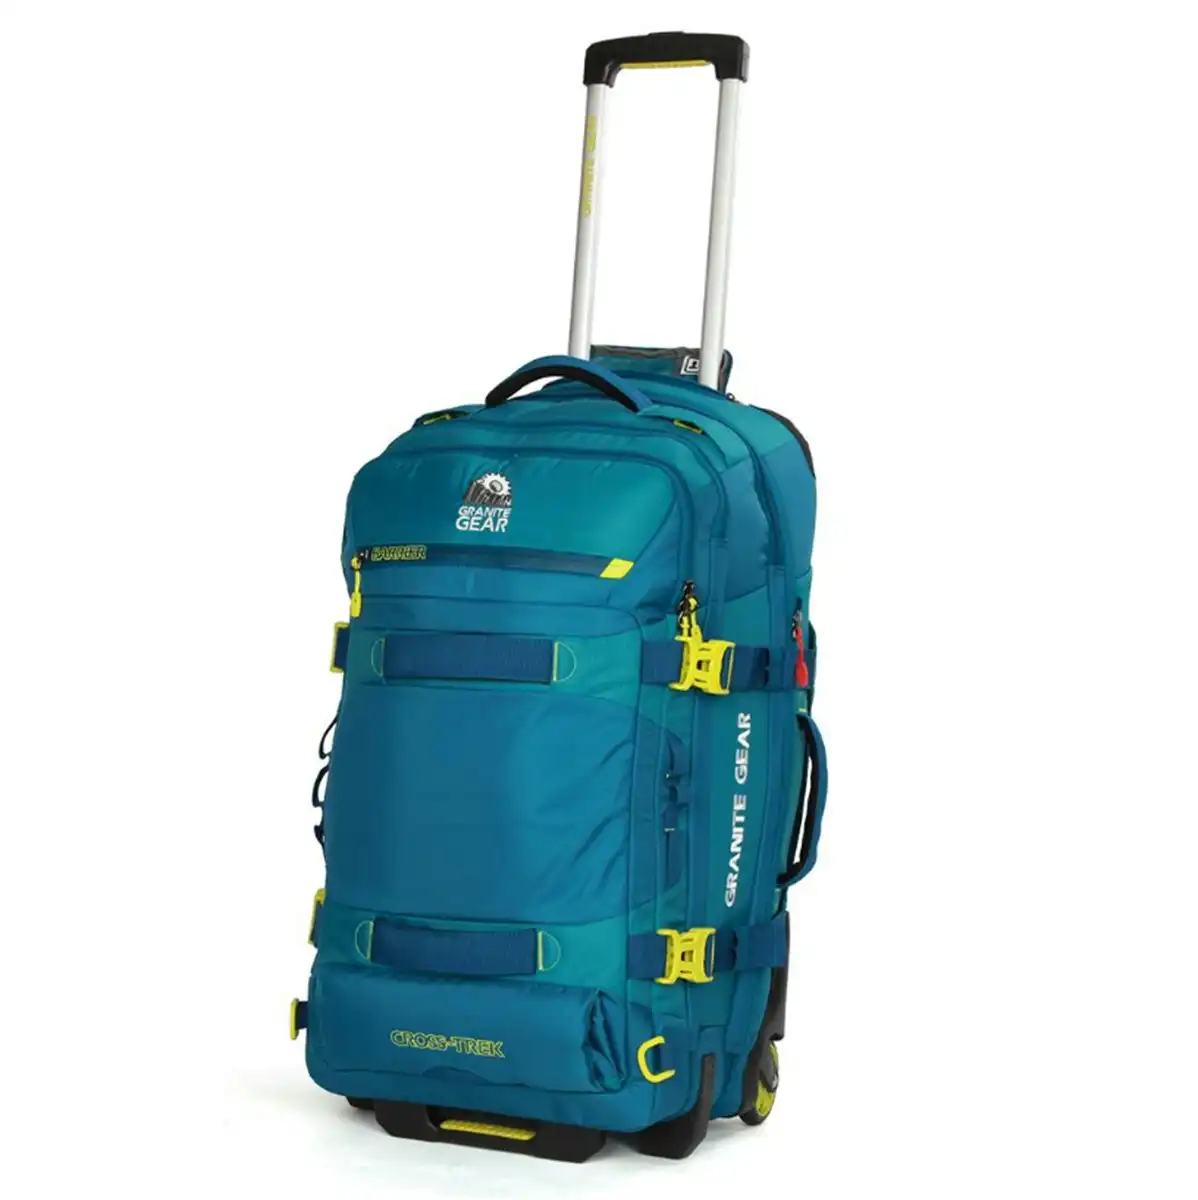 Granite Gear Wheeled Duffle With Backpack Strap Suitcase Luggage Tote Check In Sofecase G2026-5003